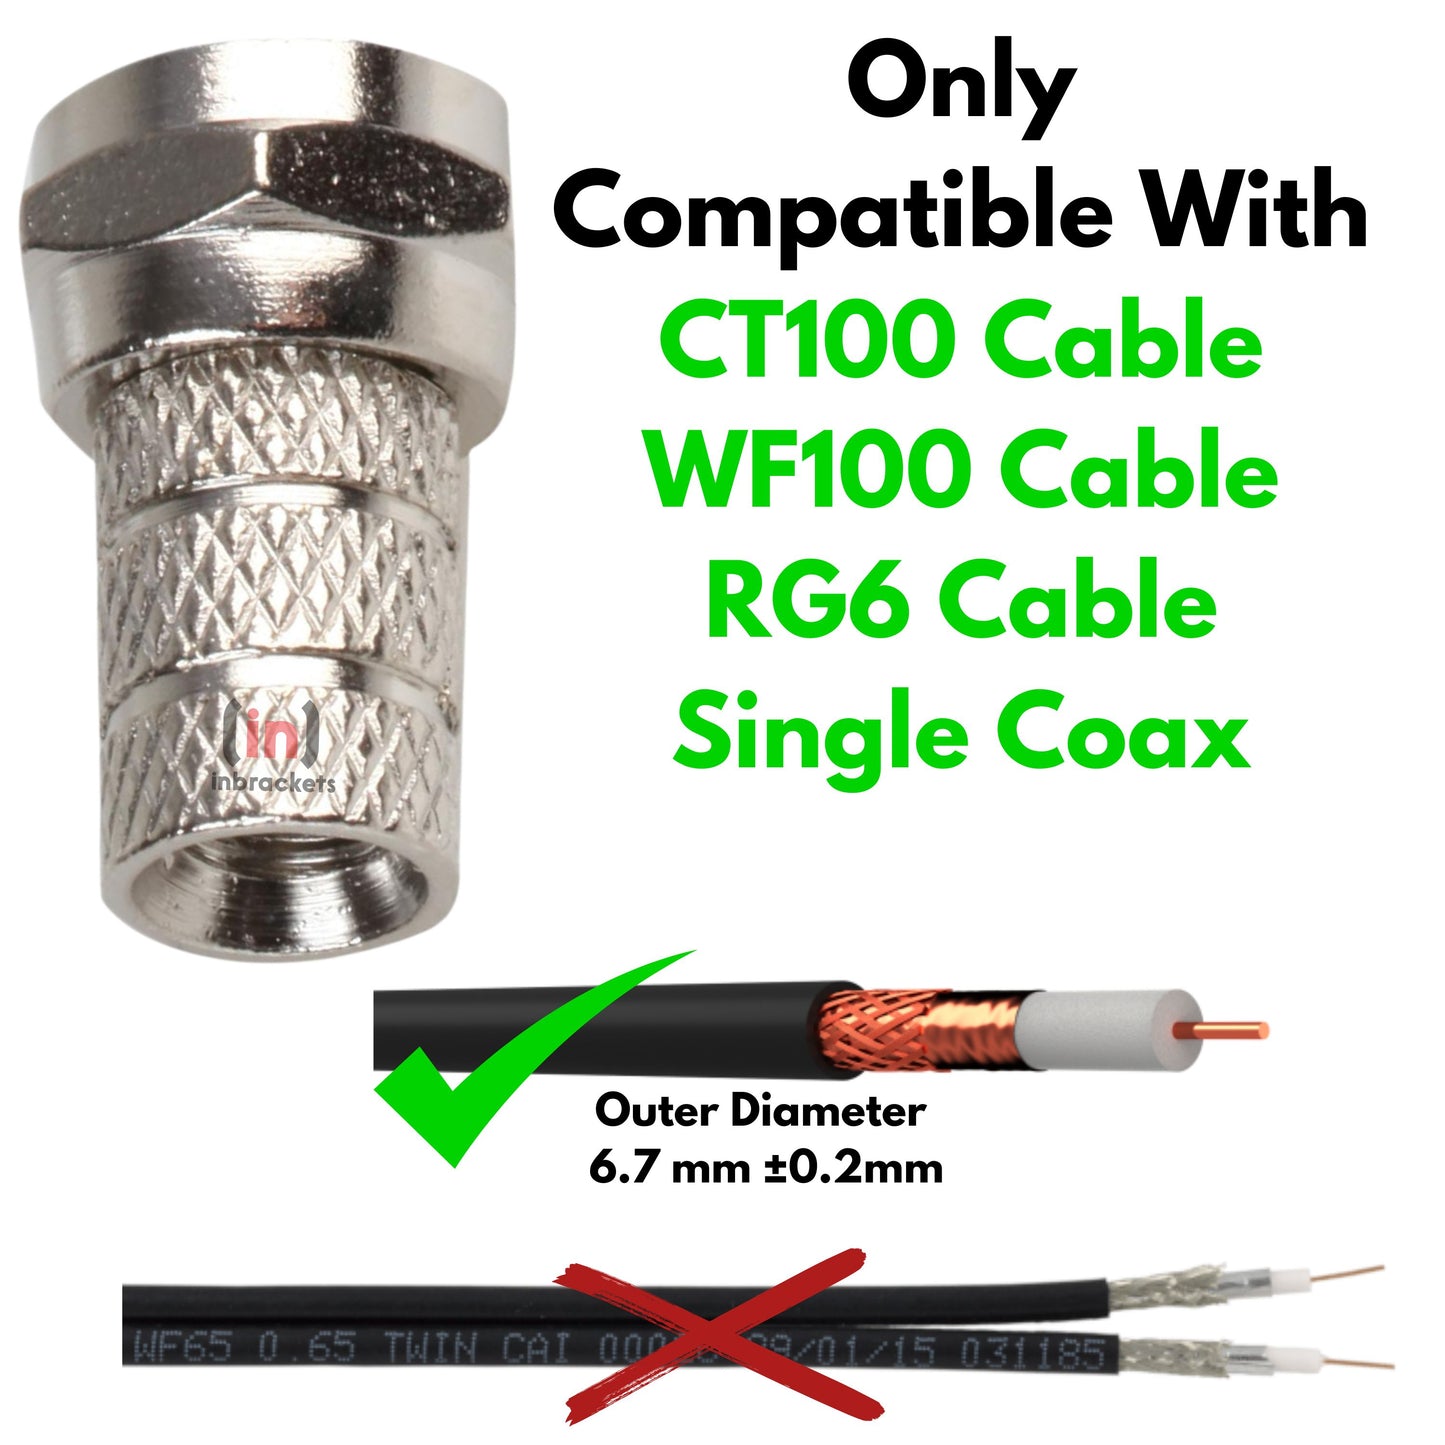 F-Type Connector Pack: Easy Twist-On Screw Connectors for RG6, WF100, CT100 Single Coaxial Cable - Set of 10